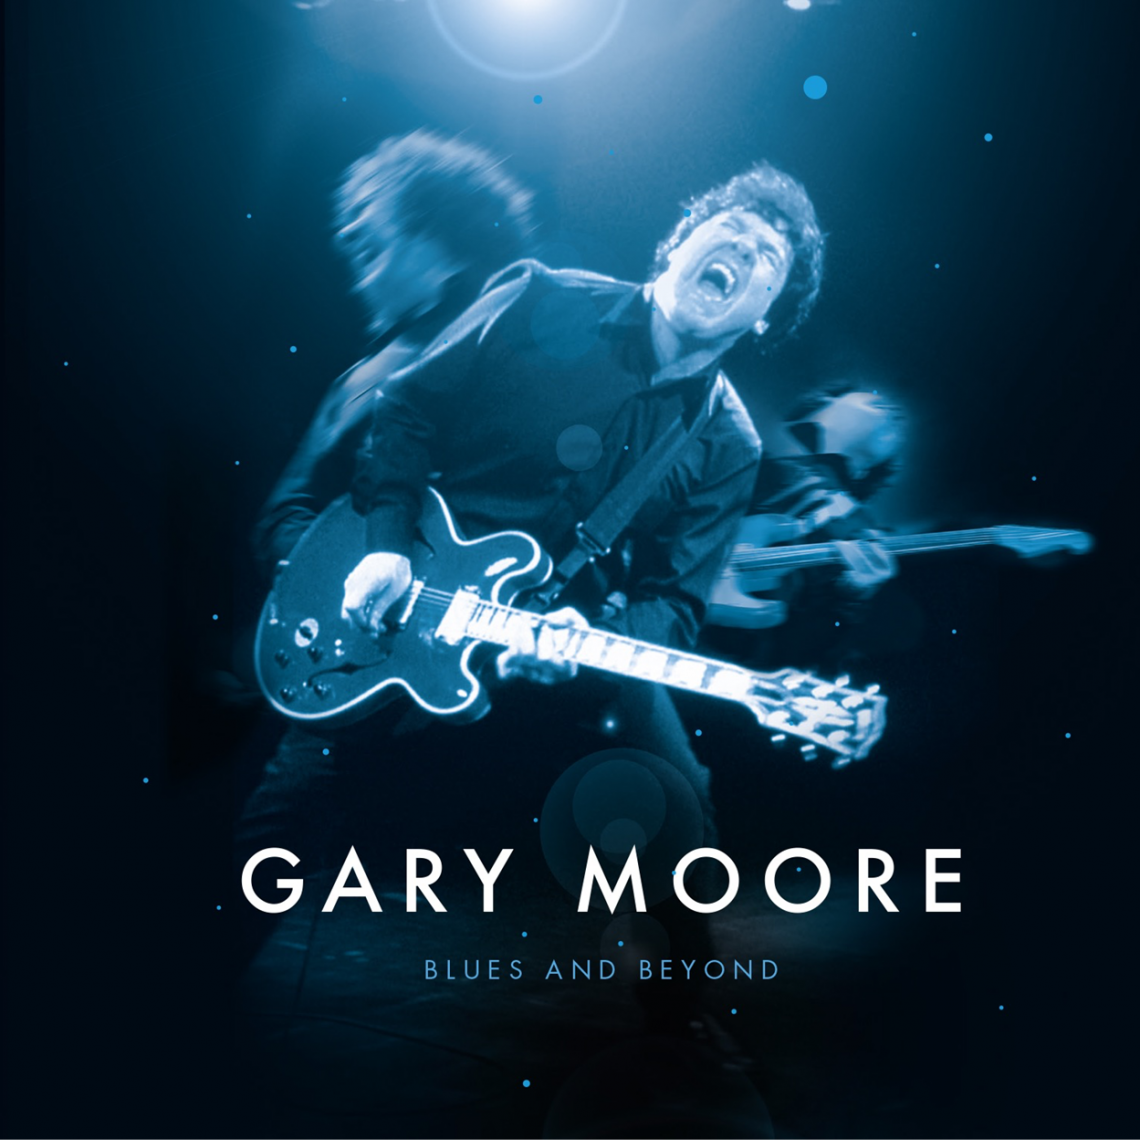 ‘Blues and Beyond’, a remarkable collection of Gary Moore’s powerful and emotive blues studio recordings is released on 24th November 2017